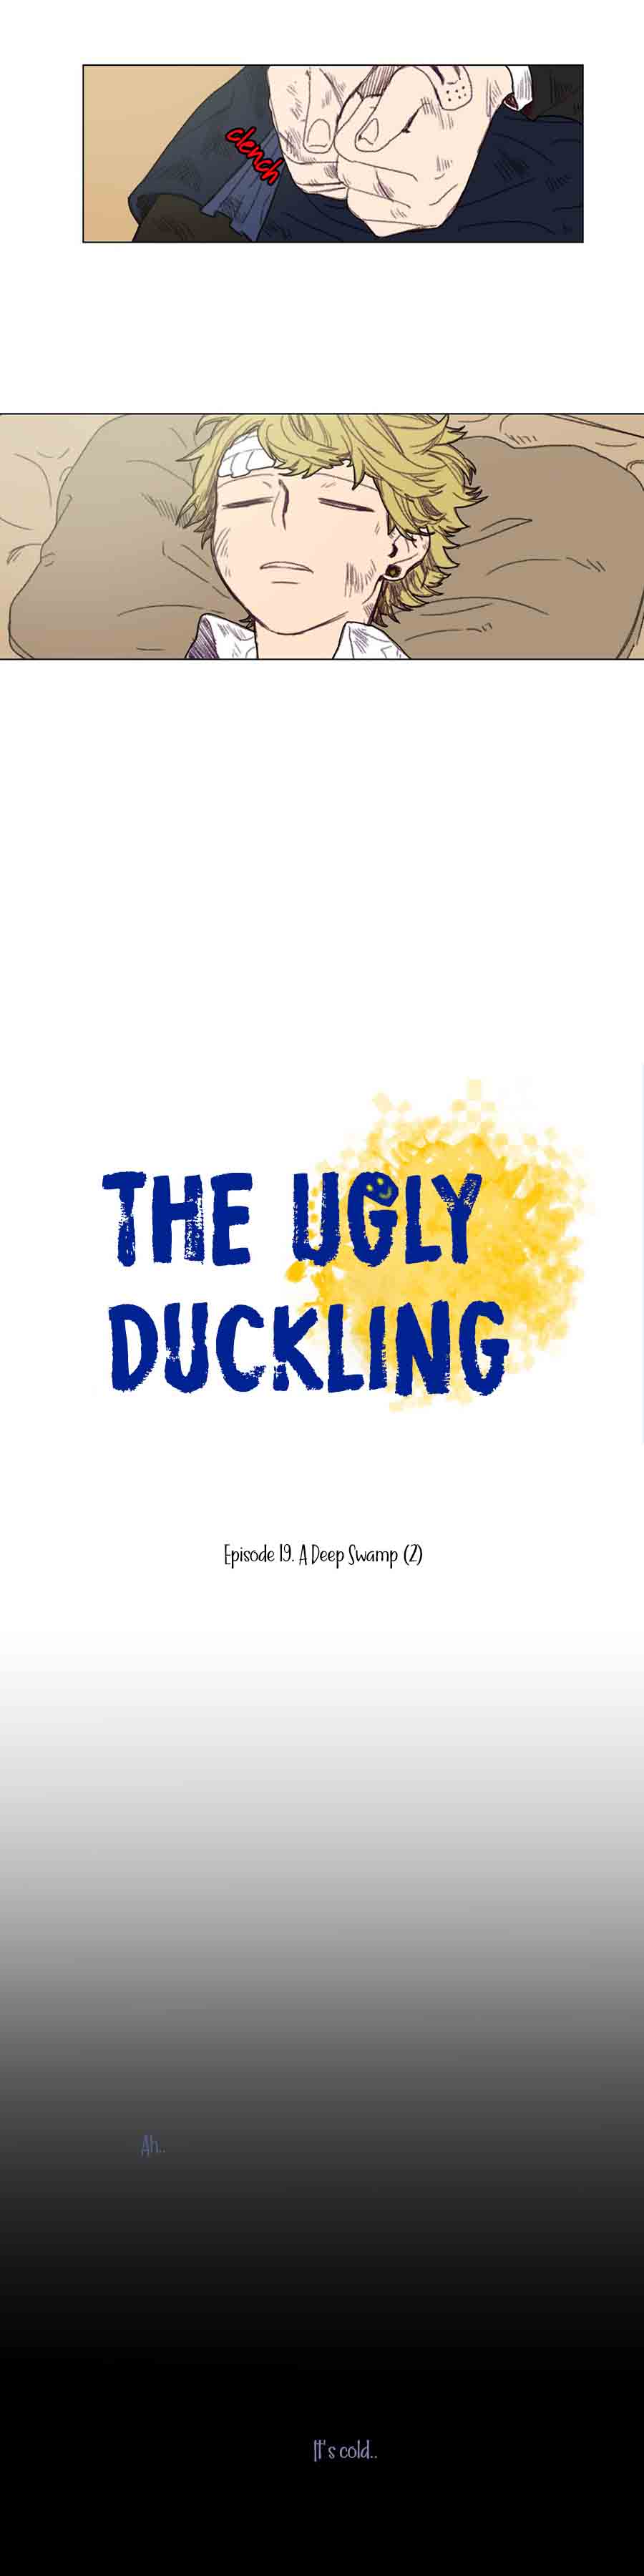 ugly_duckling_19_8